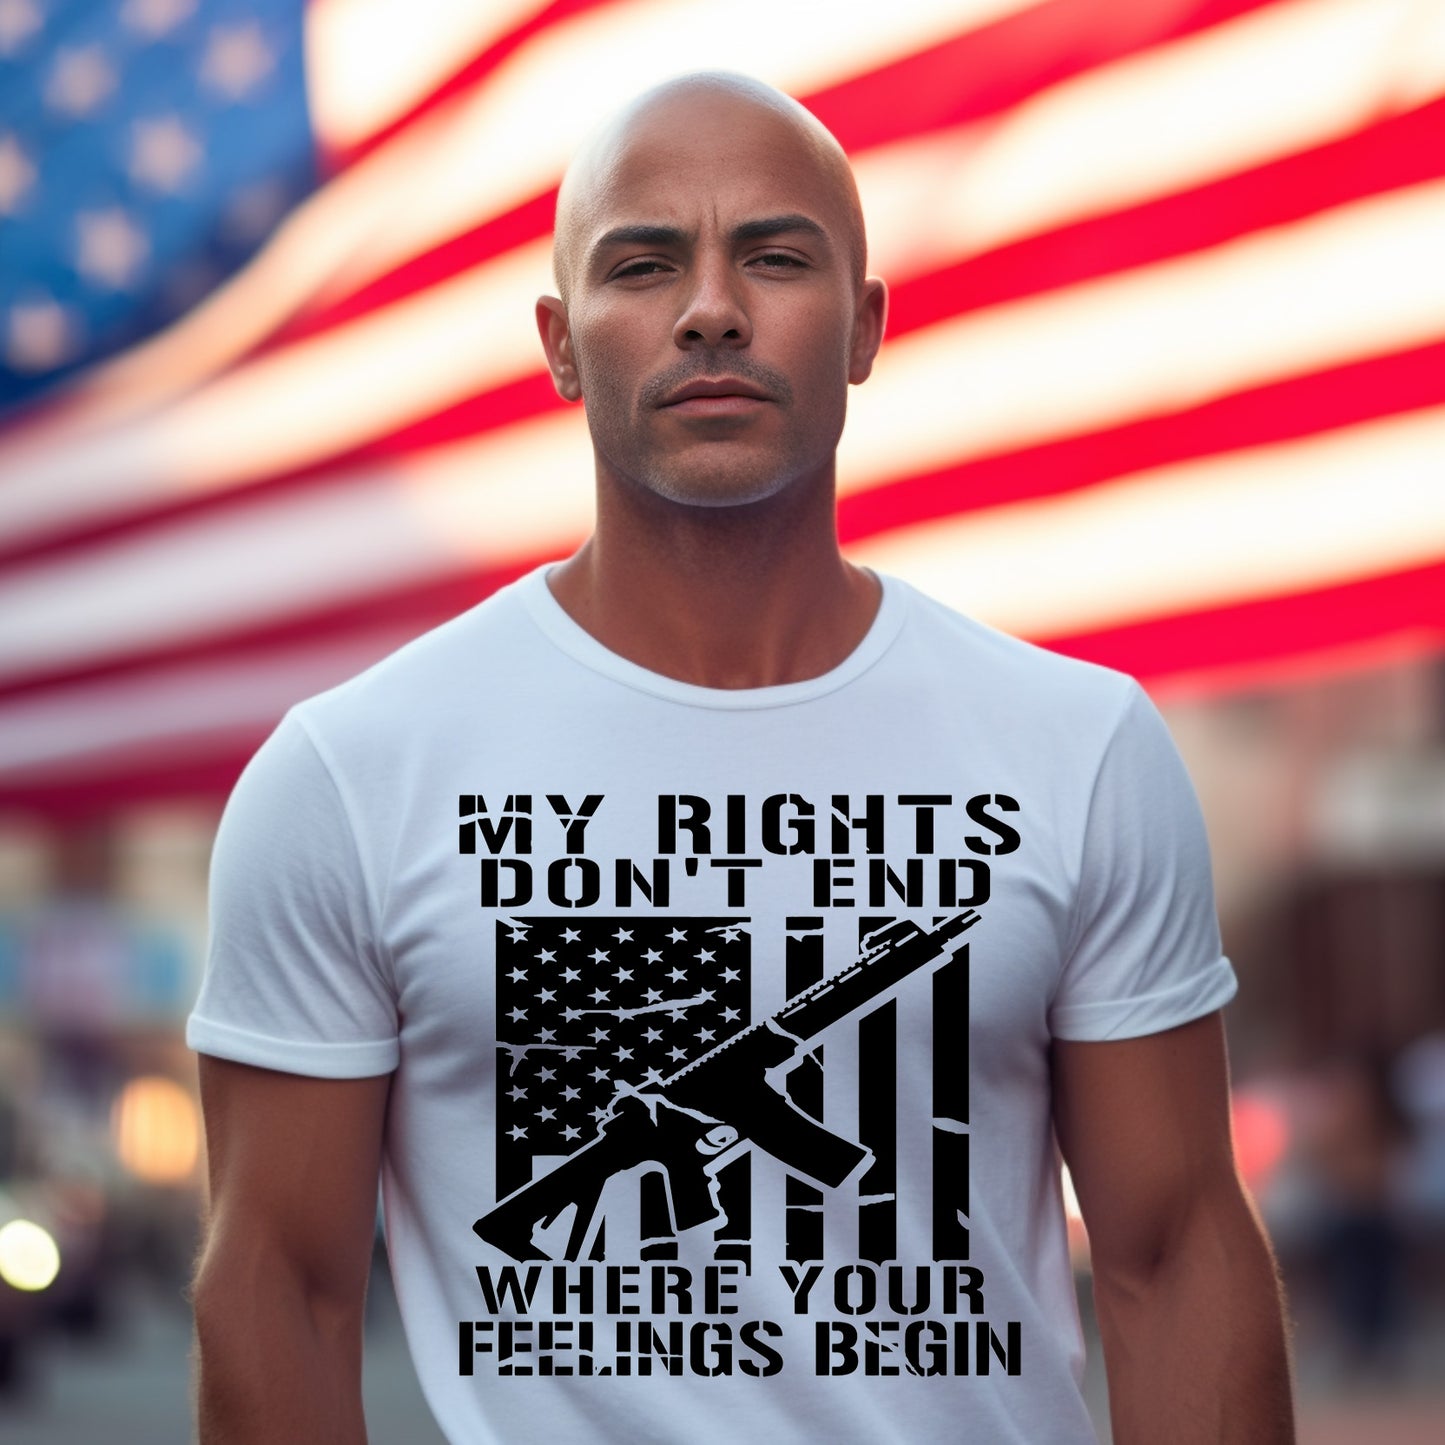 My Rights Don't End Where Your Feelings Begin- Single Color (black)- 11.5" wide Plastisol Screen Print Transfer